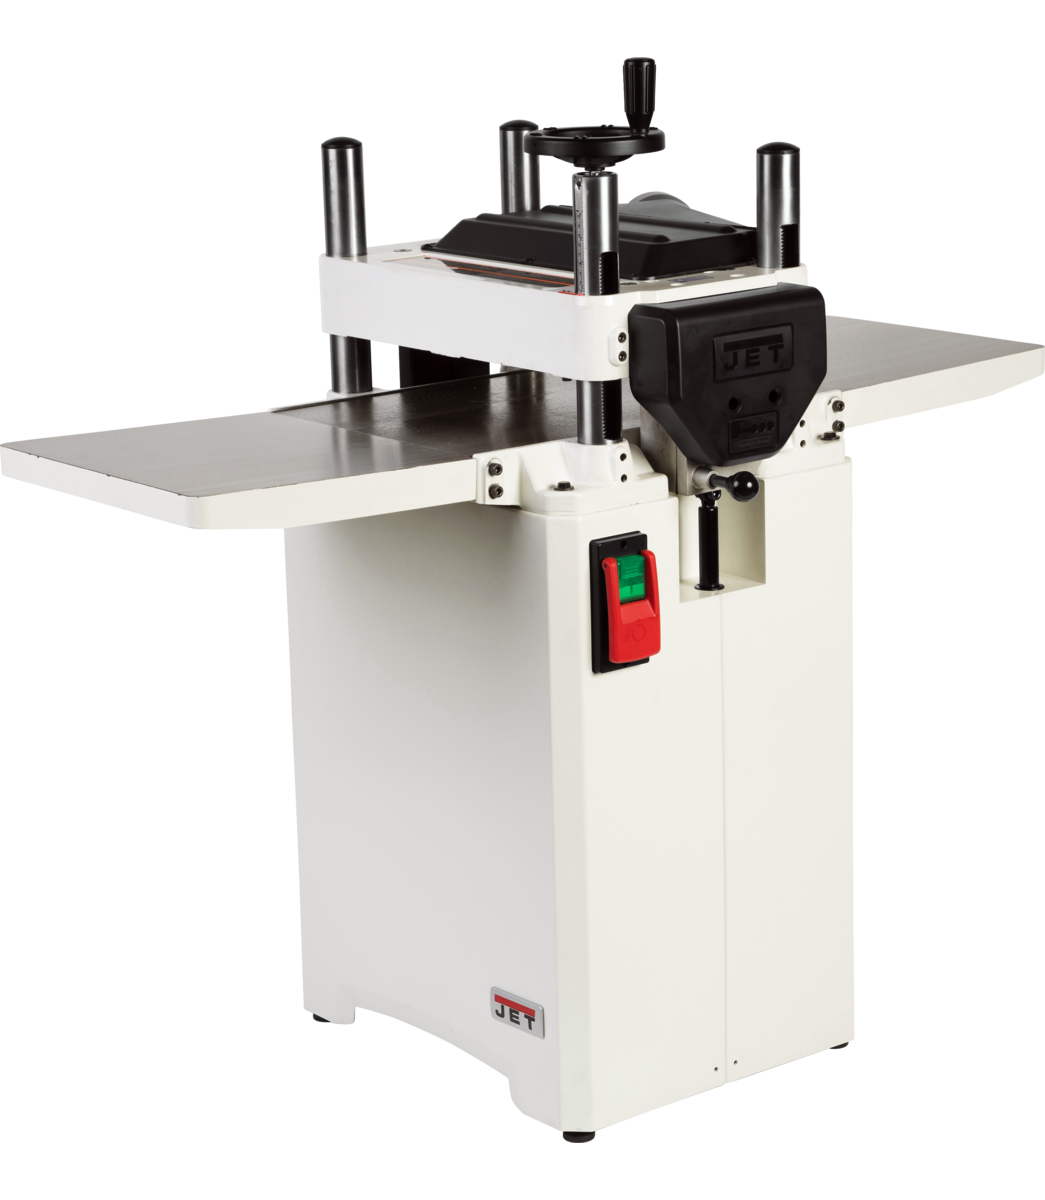 JET 3 HP 25 in. Wood Shaper at Tractor Supply Co.